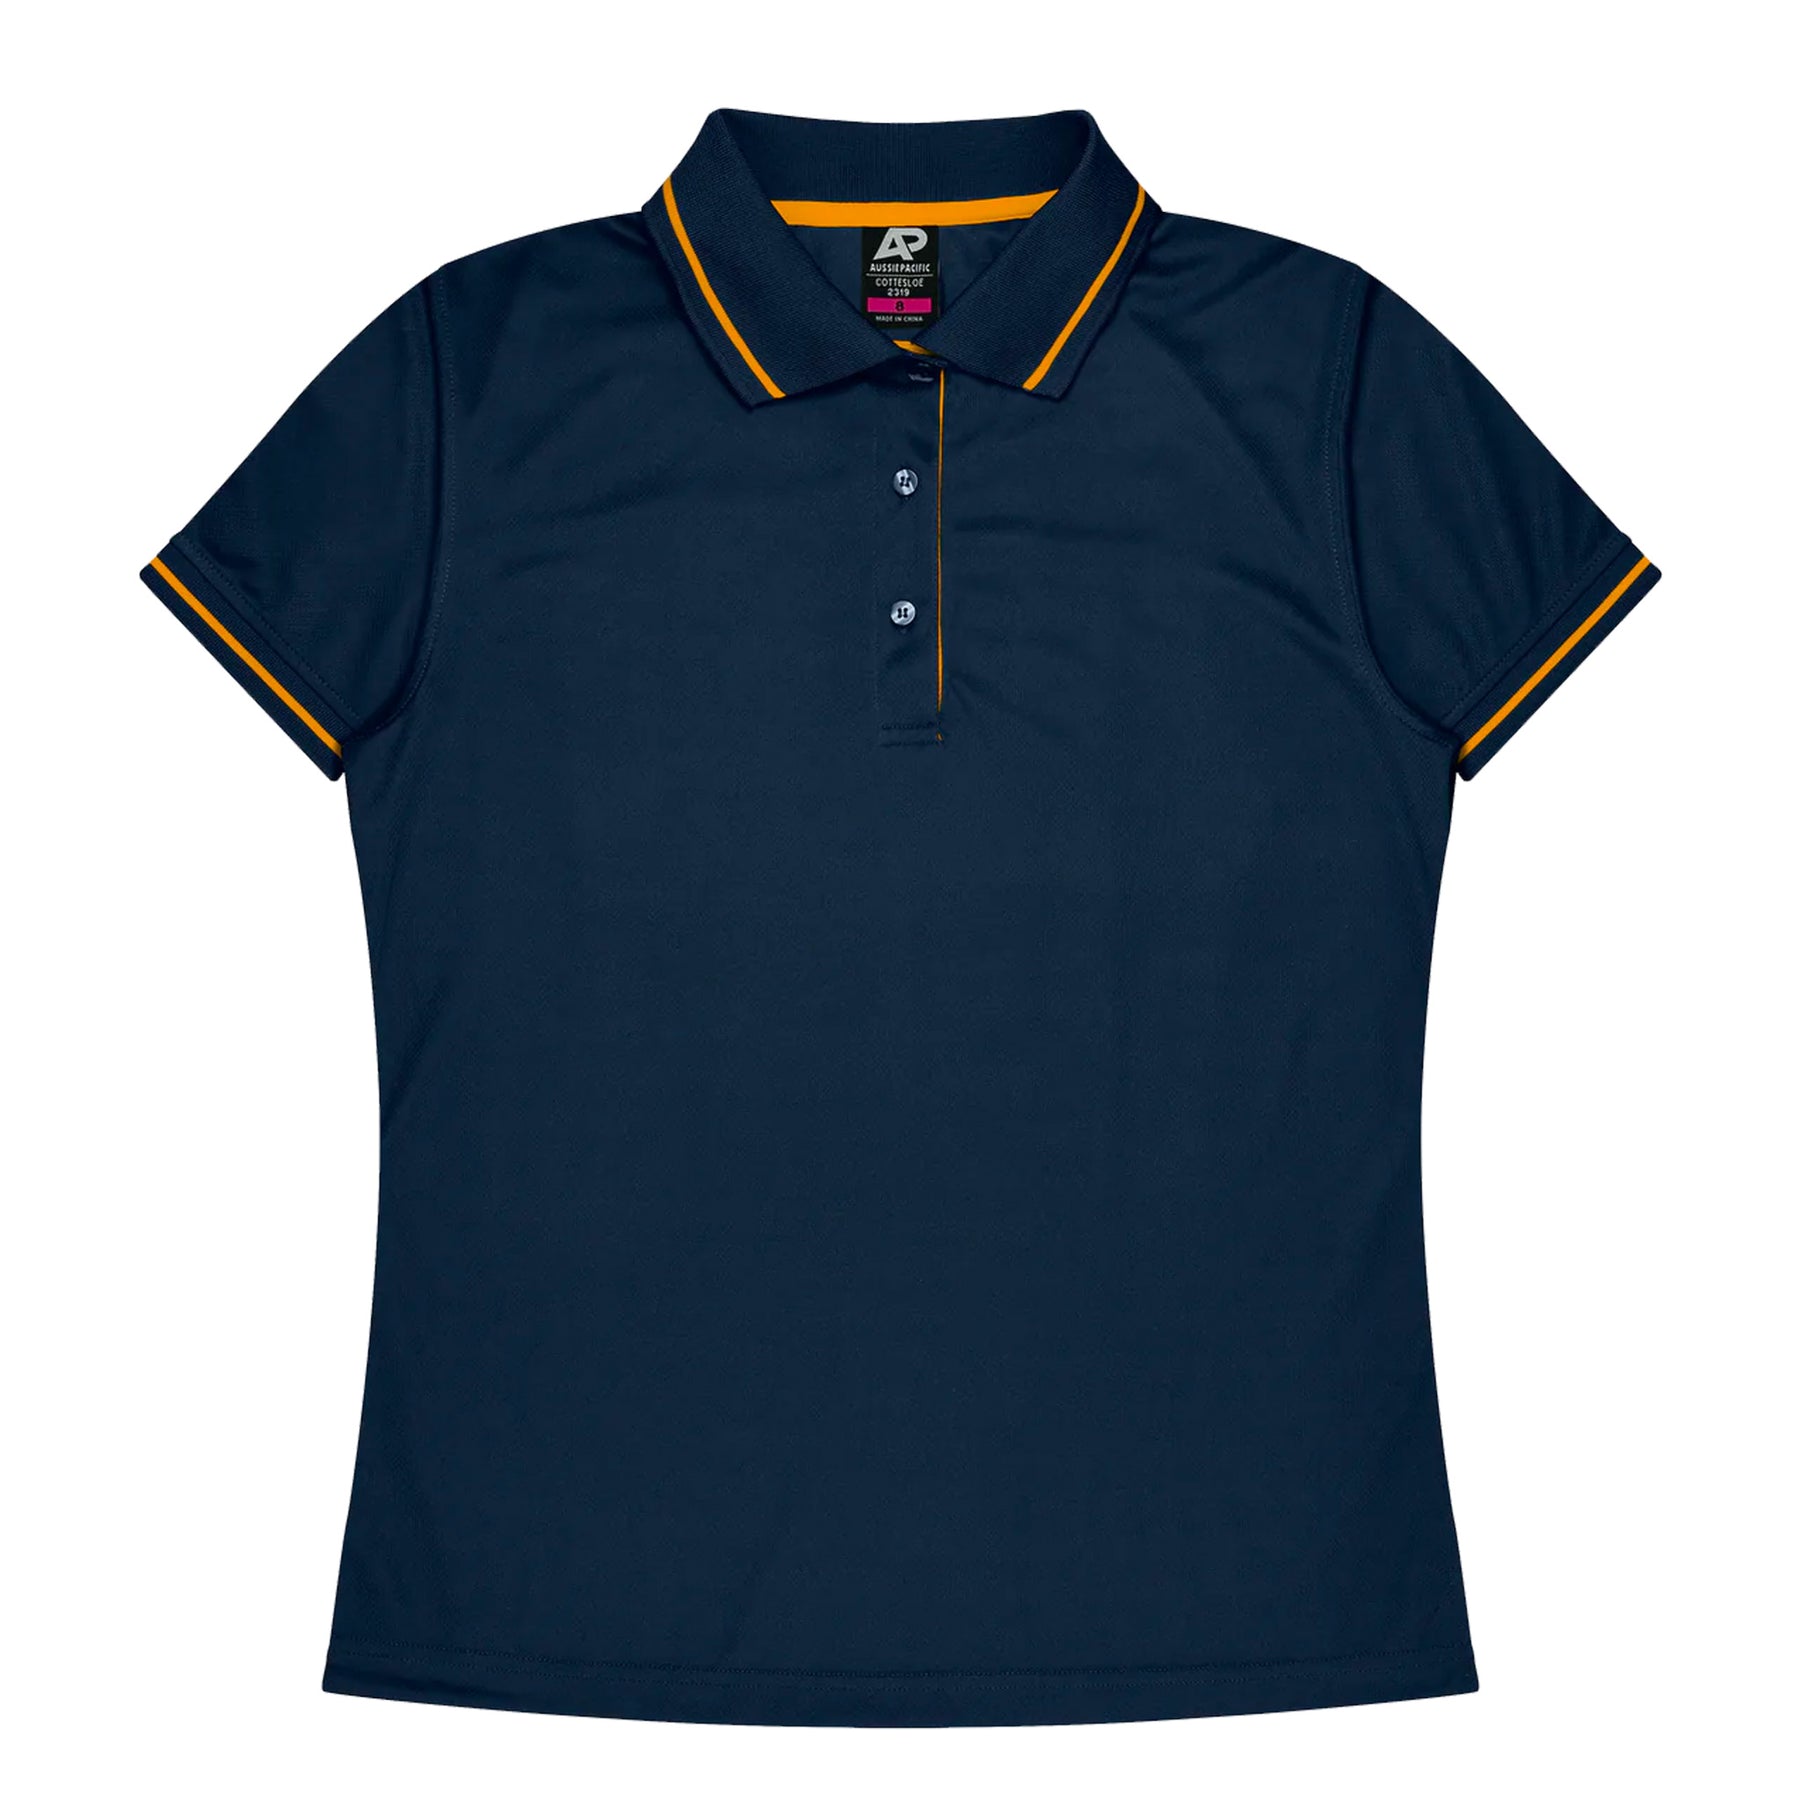 cottesloe ladies polo in navy gold